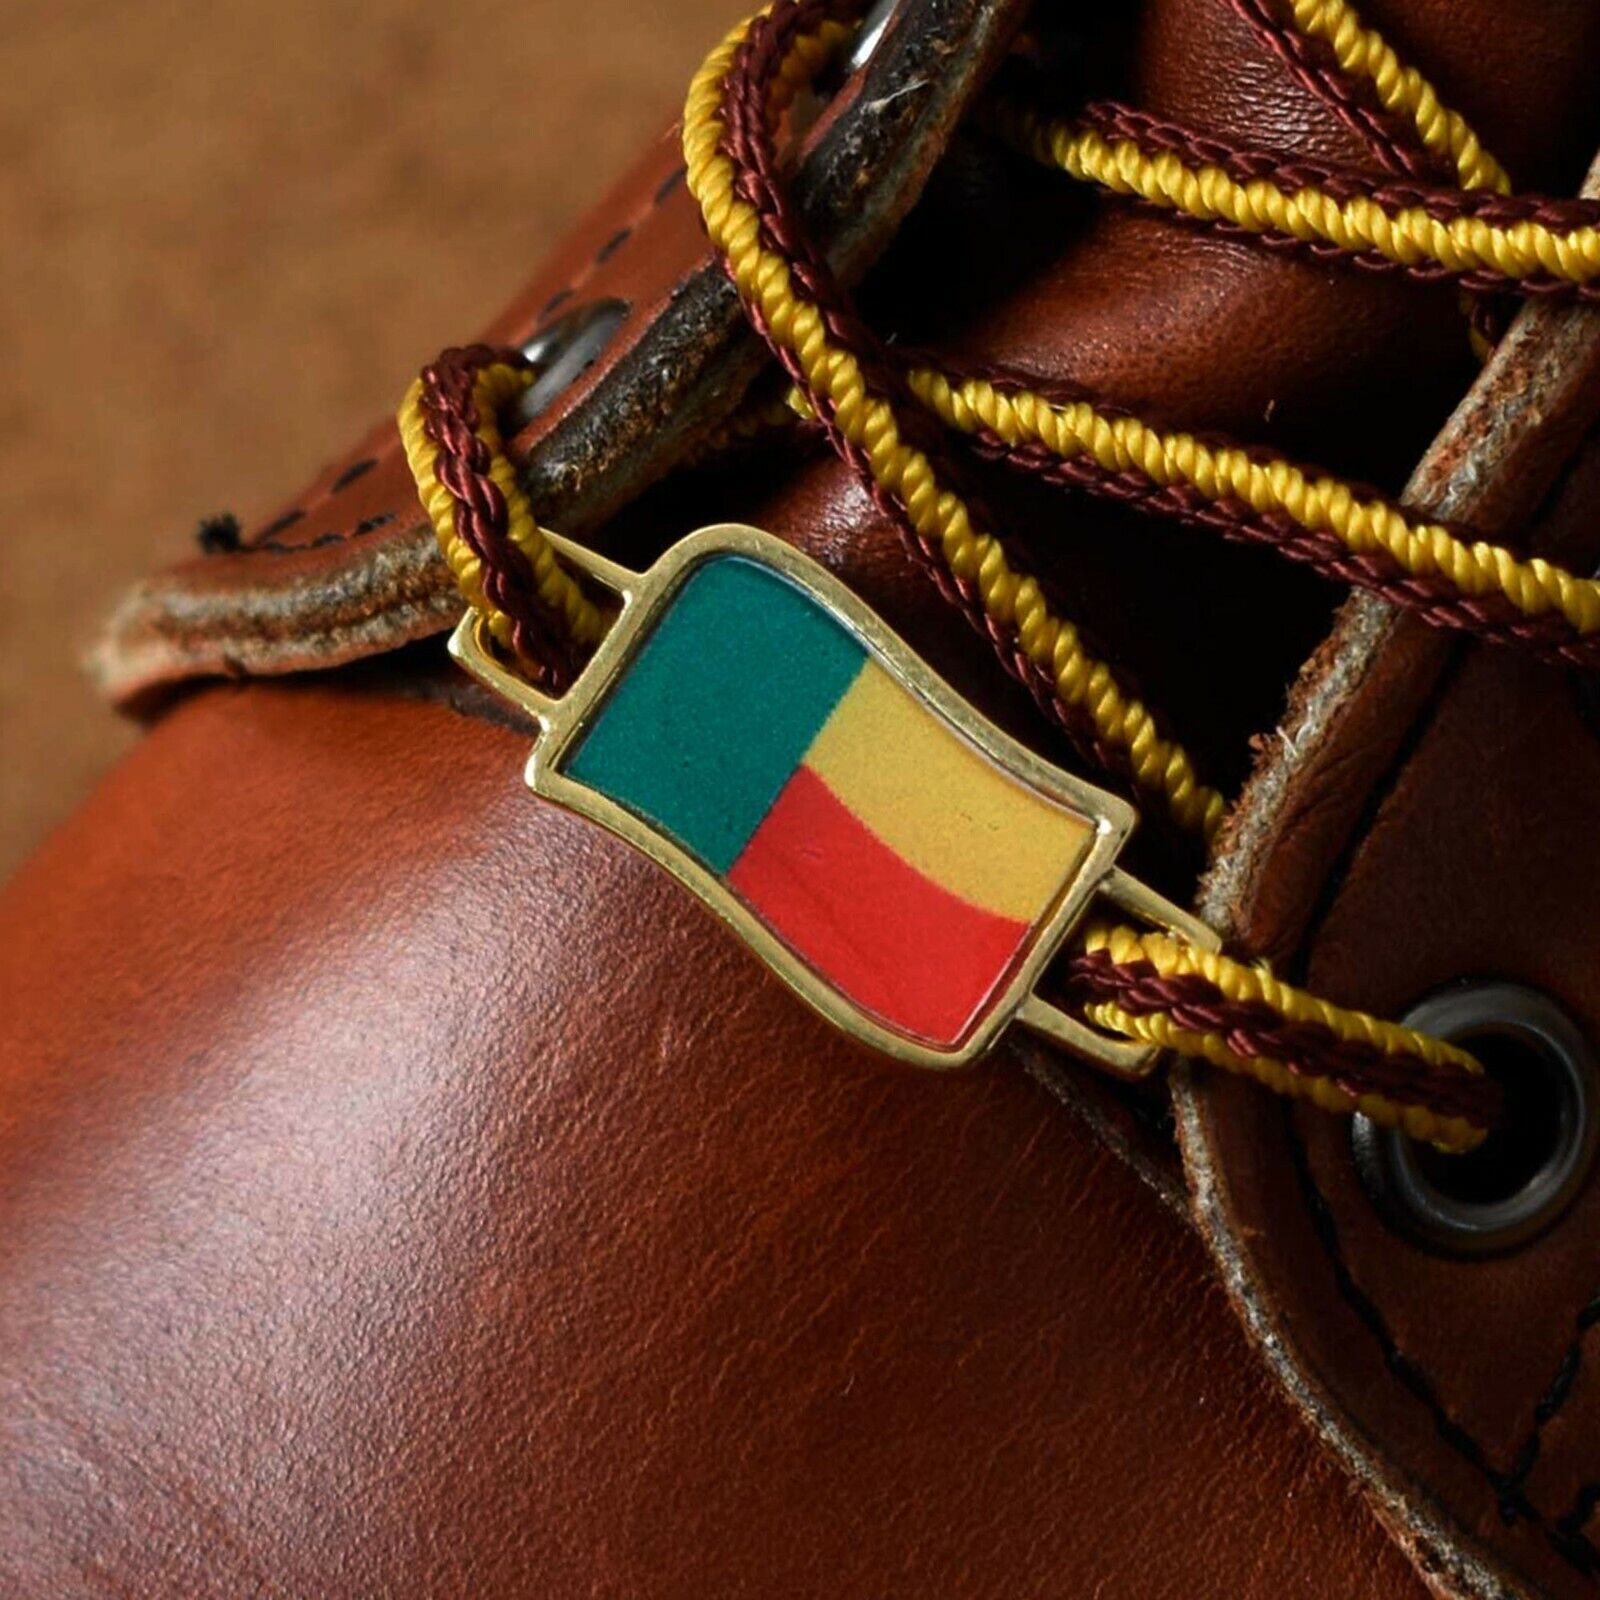 Benin Flags Shoes Boot Shoelace Keeper Holder Charm BrooklynMaker